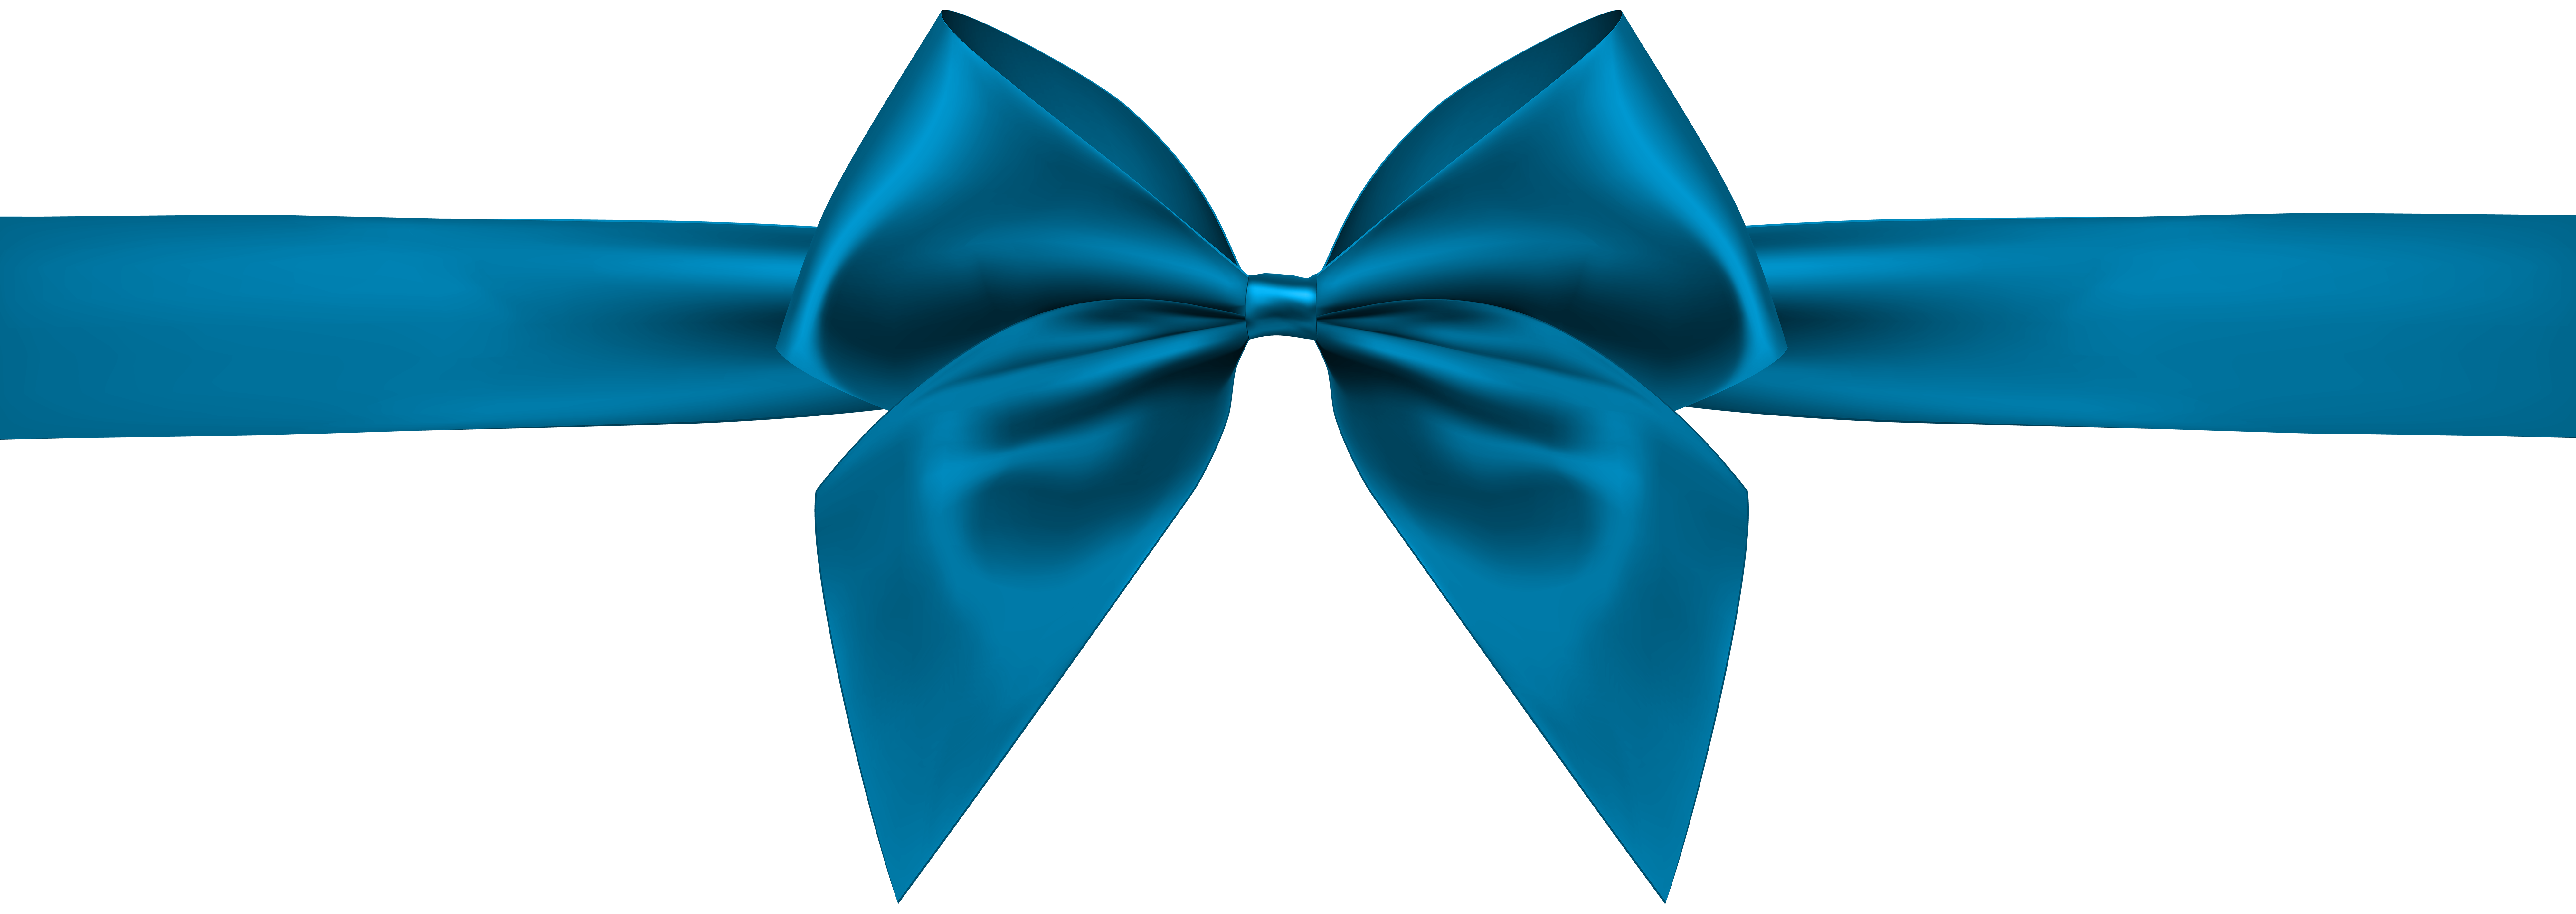 Blue Bow Transparent Clip Art Image | Gallery Yopriceville - High ...